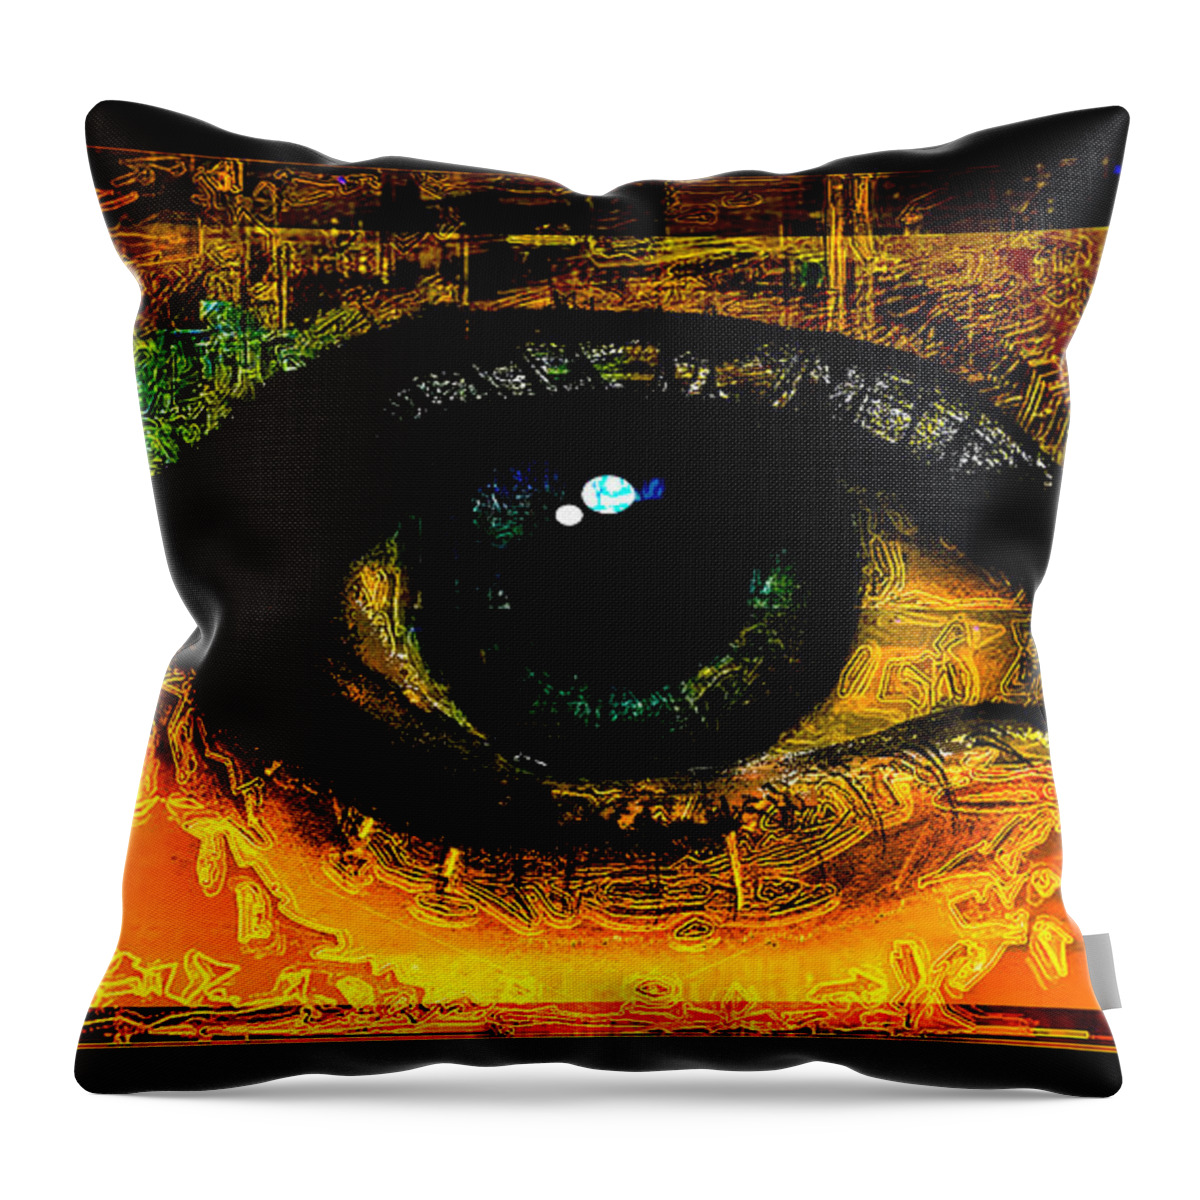 Eyes On Me Collection Throw Pillow featuring the digital art Pretty Eye 16 by Aldane Wynter